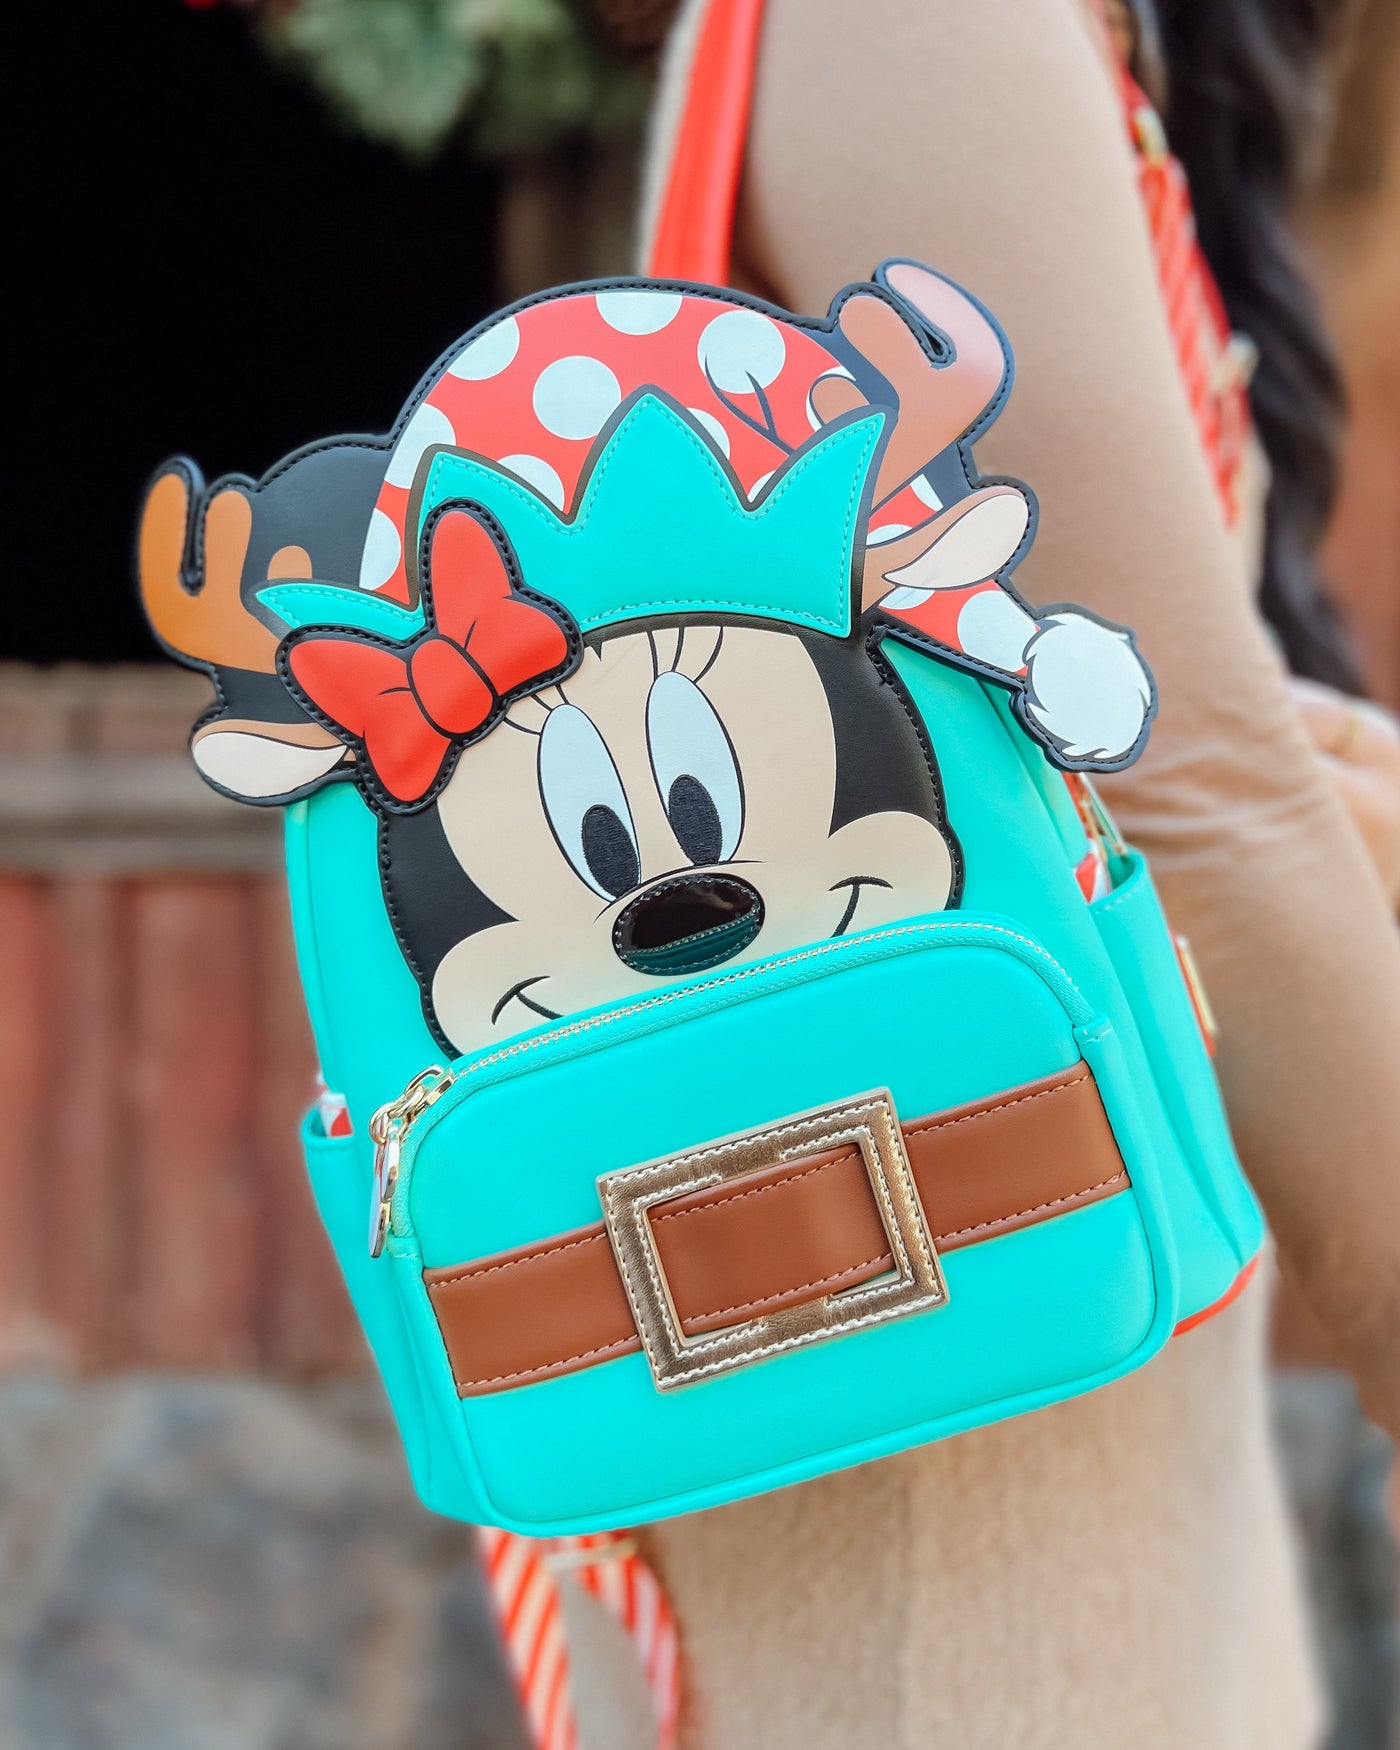 707 Street Exclusive - Loungefly Disney Light Up Minnie Mouse Reindeer Cosplay Mini Backpack - Loungefly mini backpack lifestyle image 01